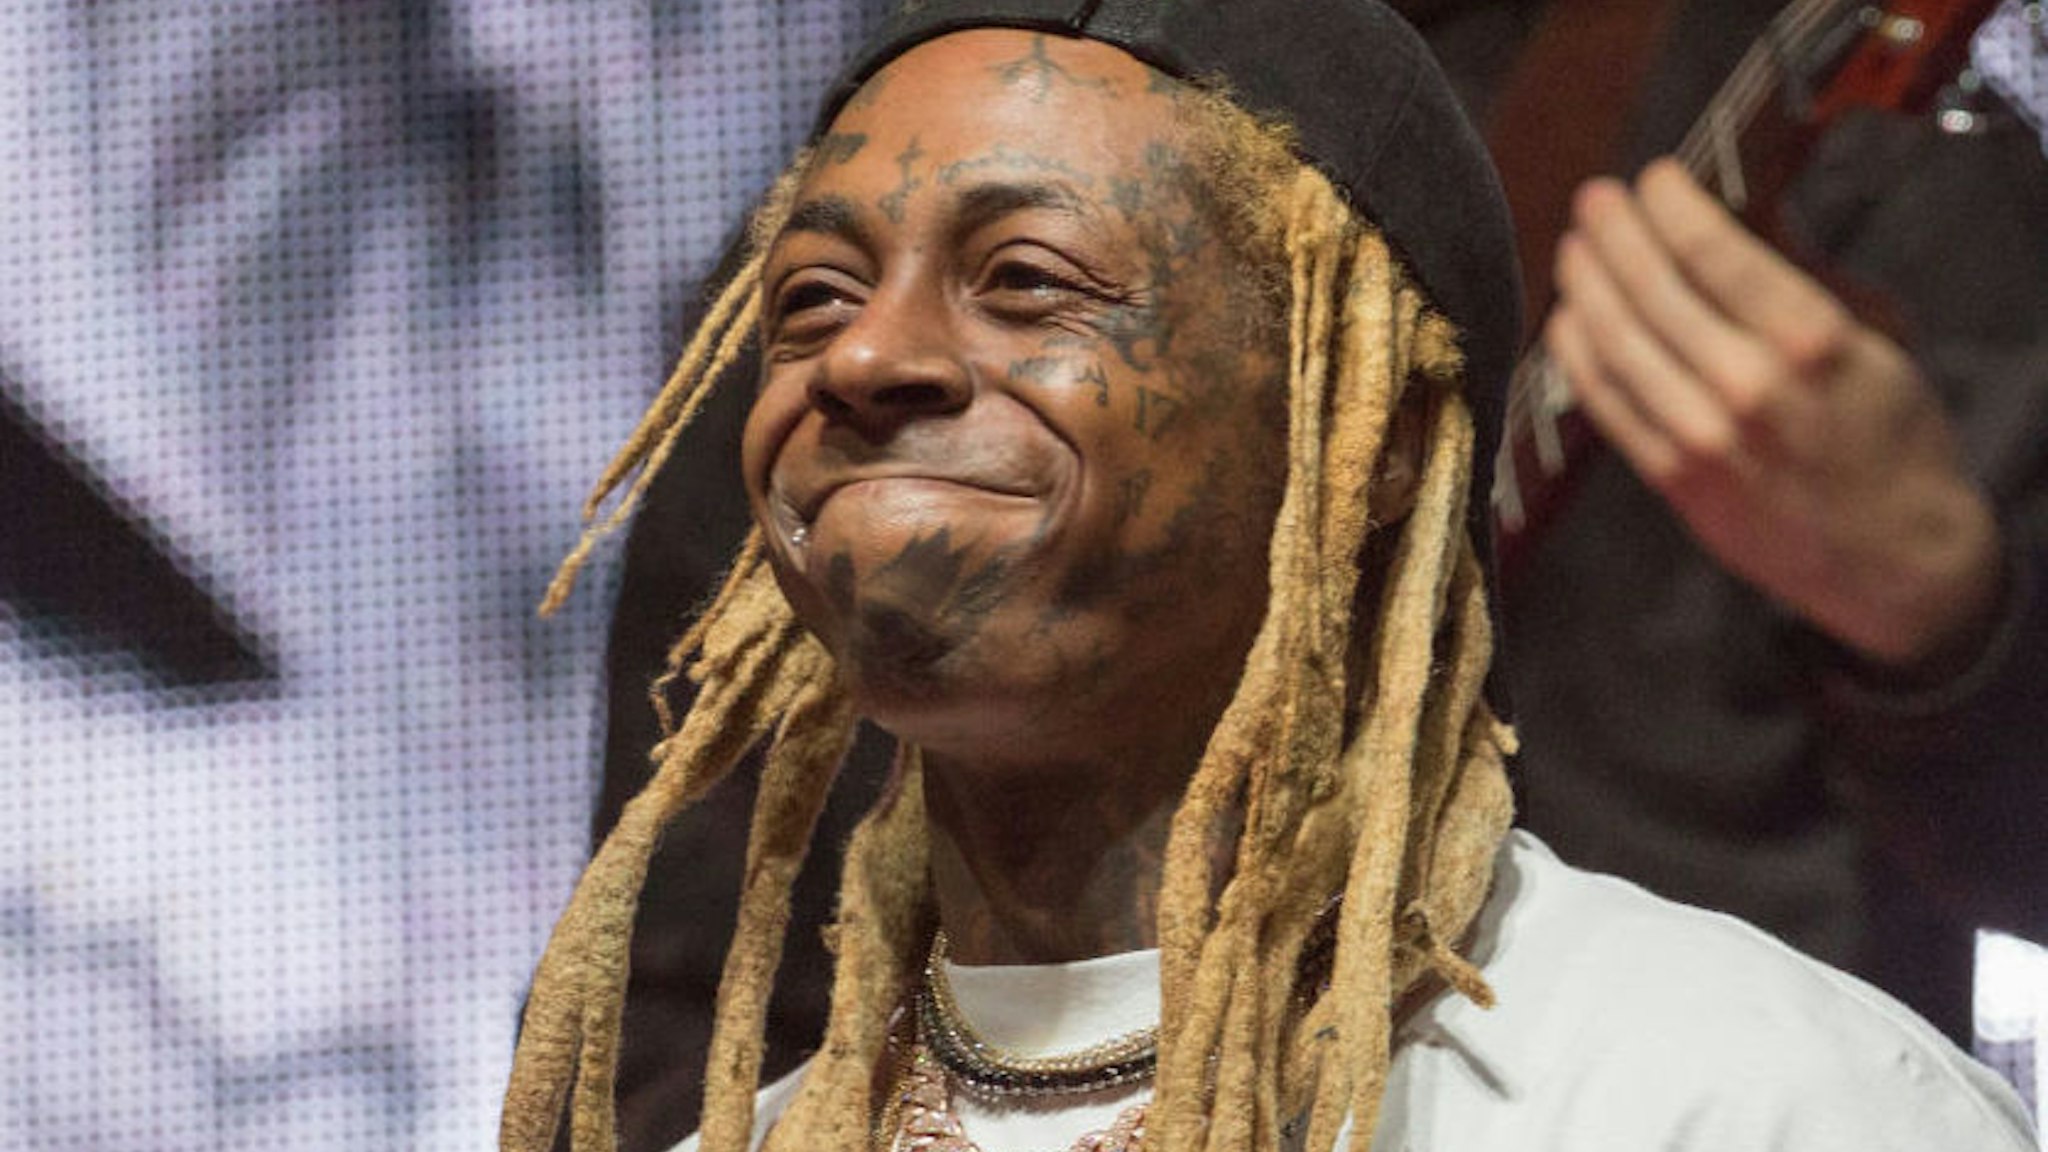 Rapper Lil Wayne performs onstage during JMBLYA at Fair Park on May 03, 2019 in Dallas, Texas.